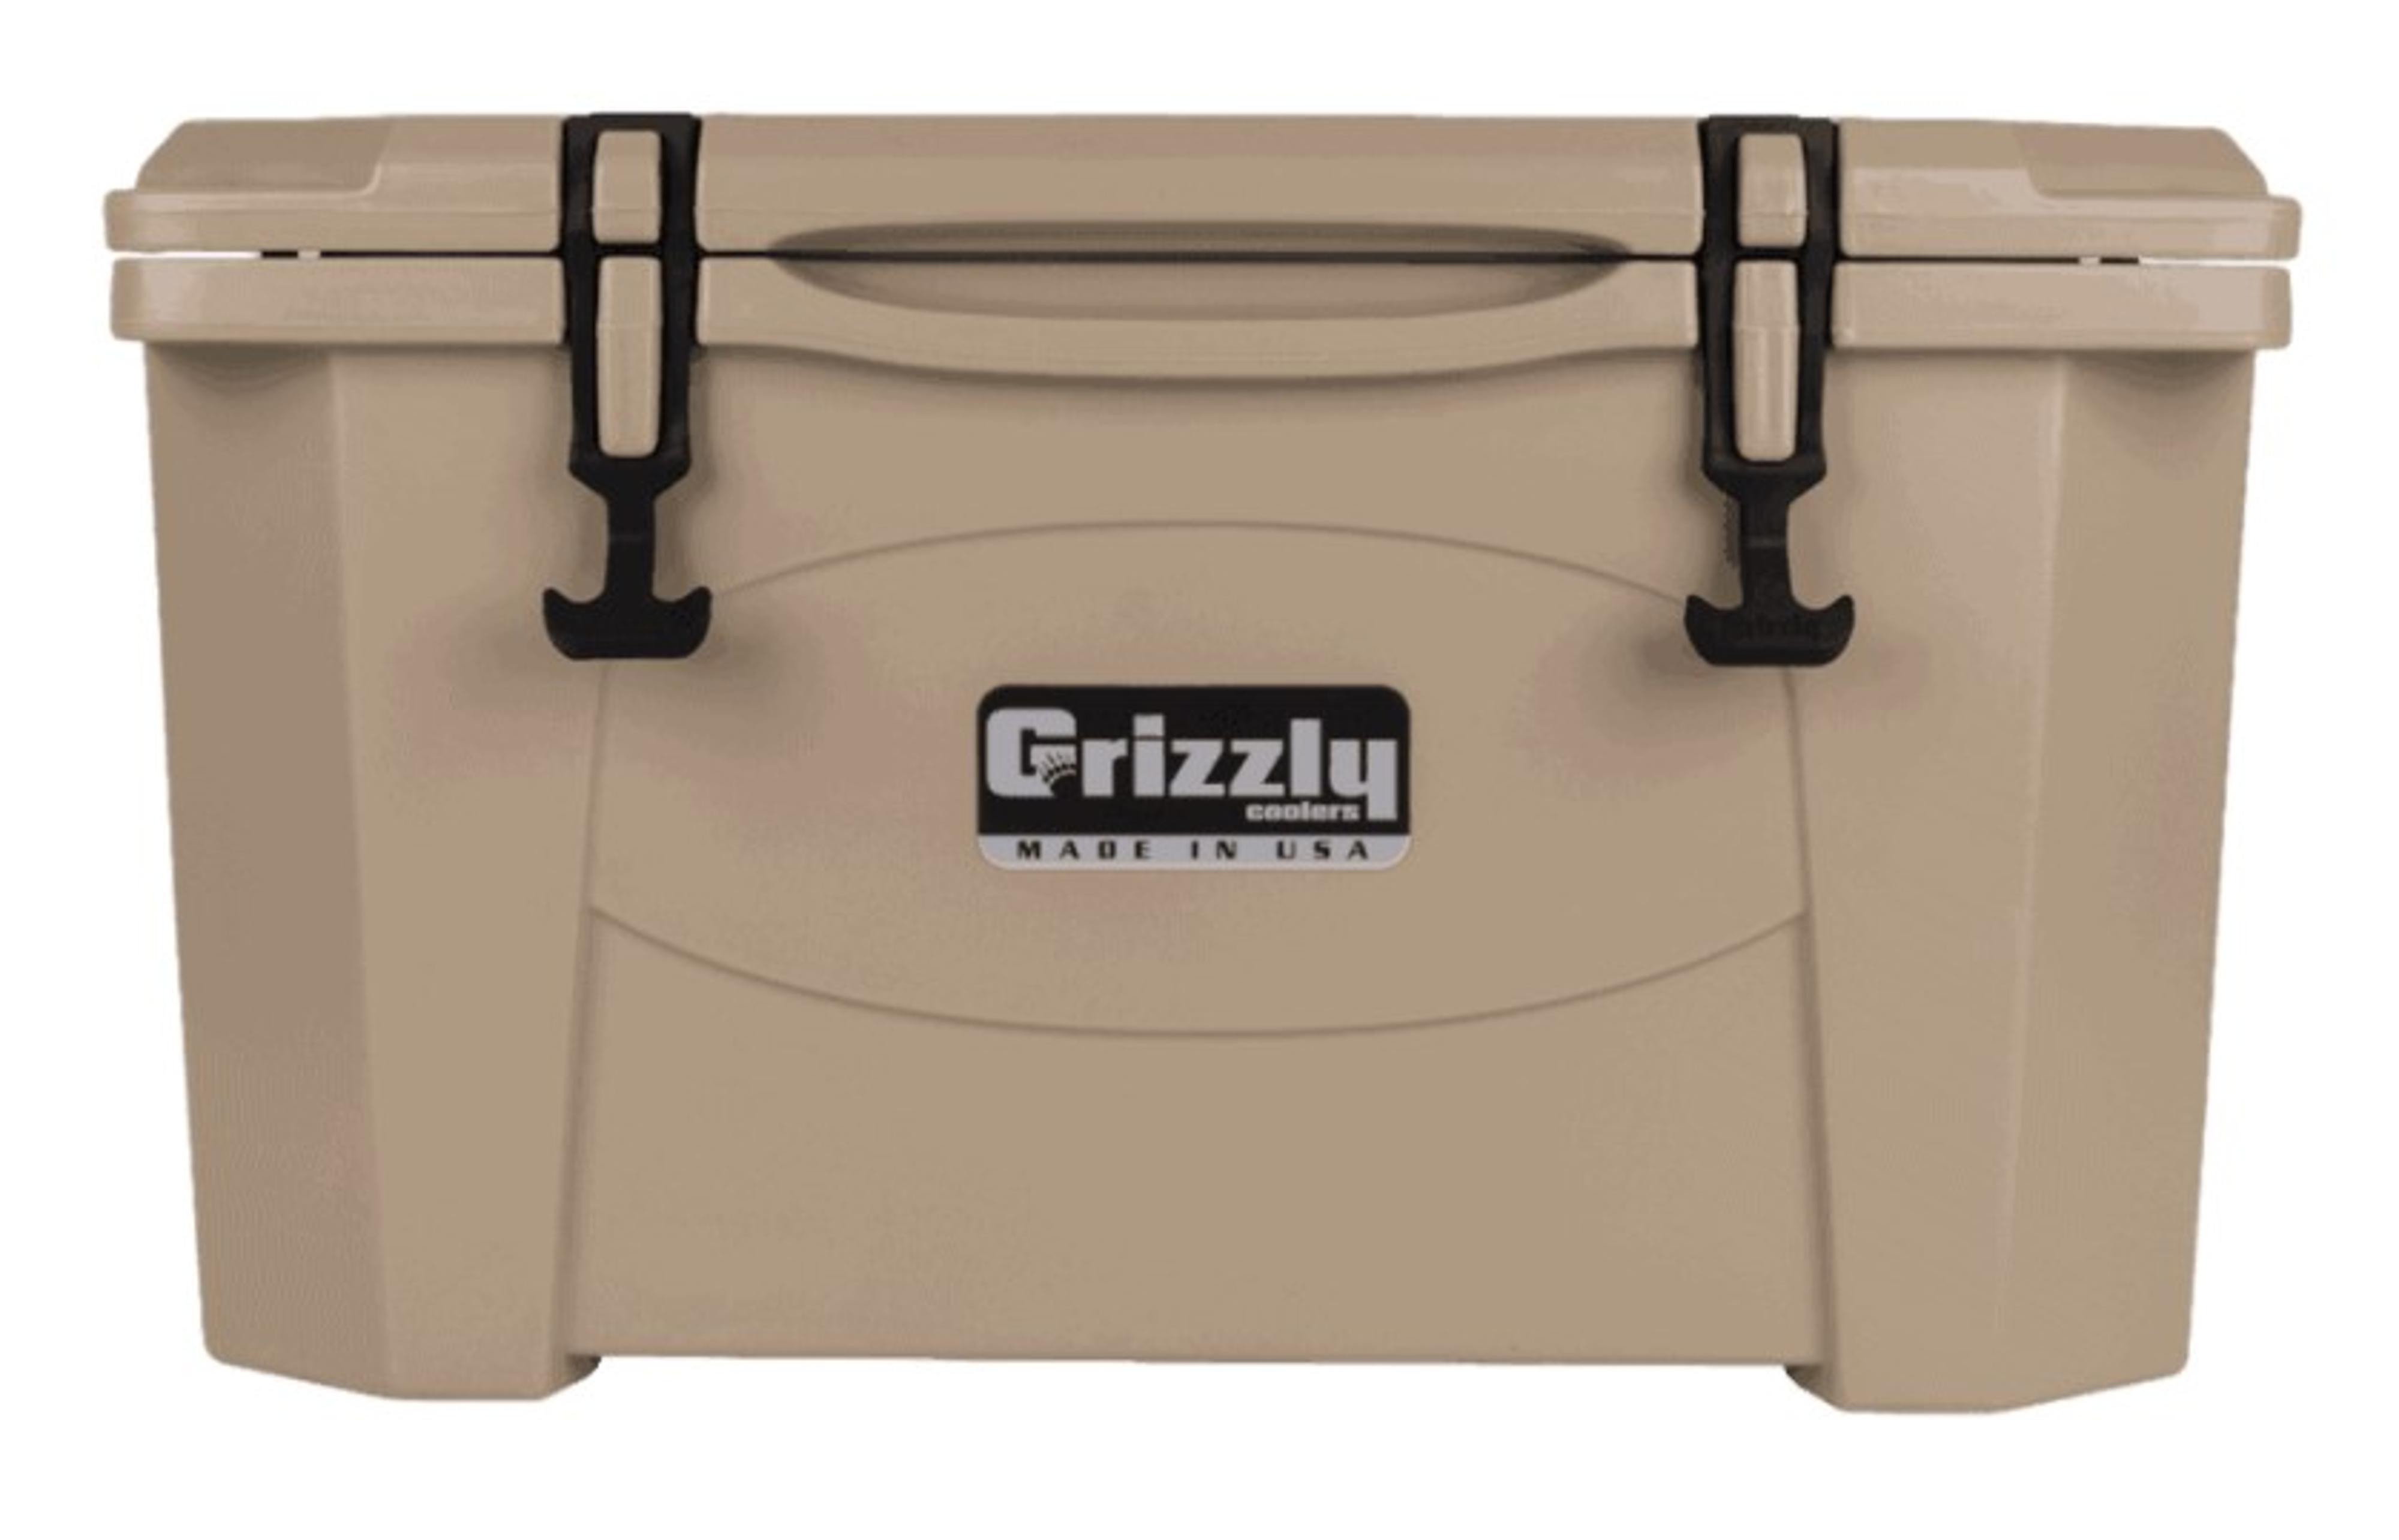  Grizzly 40